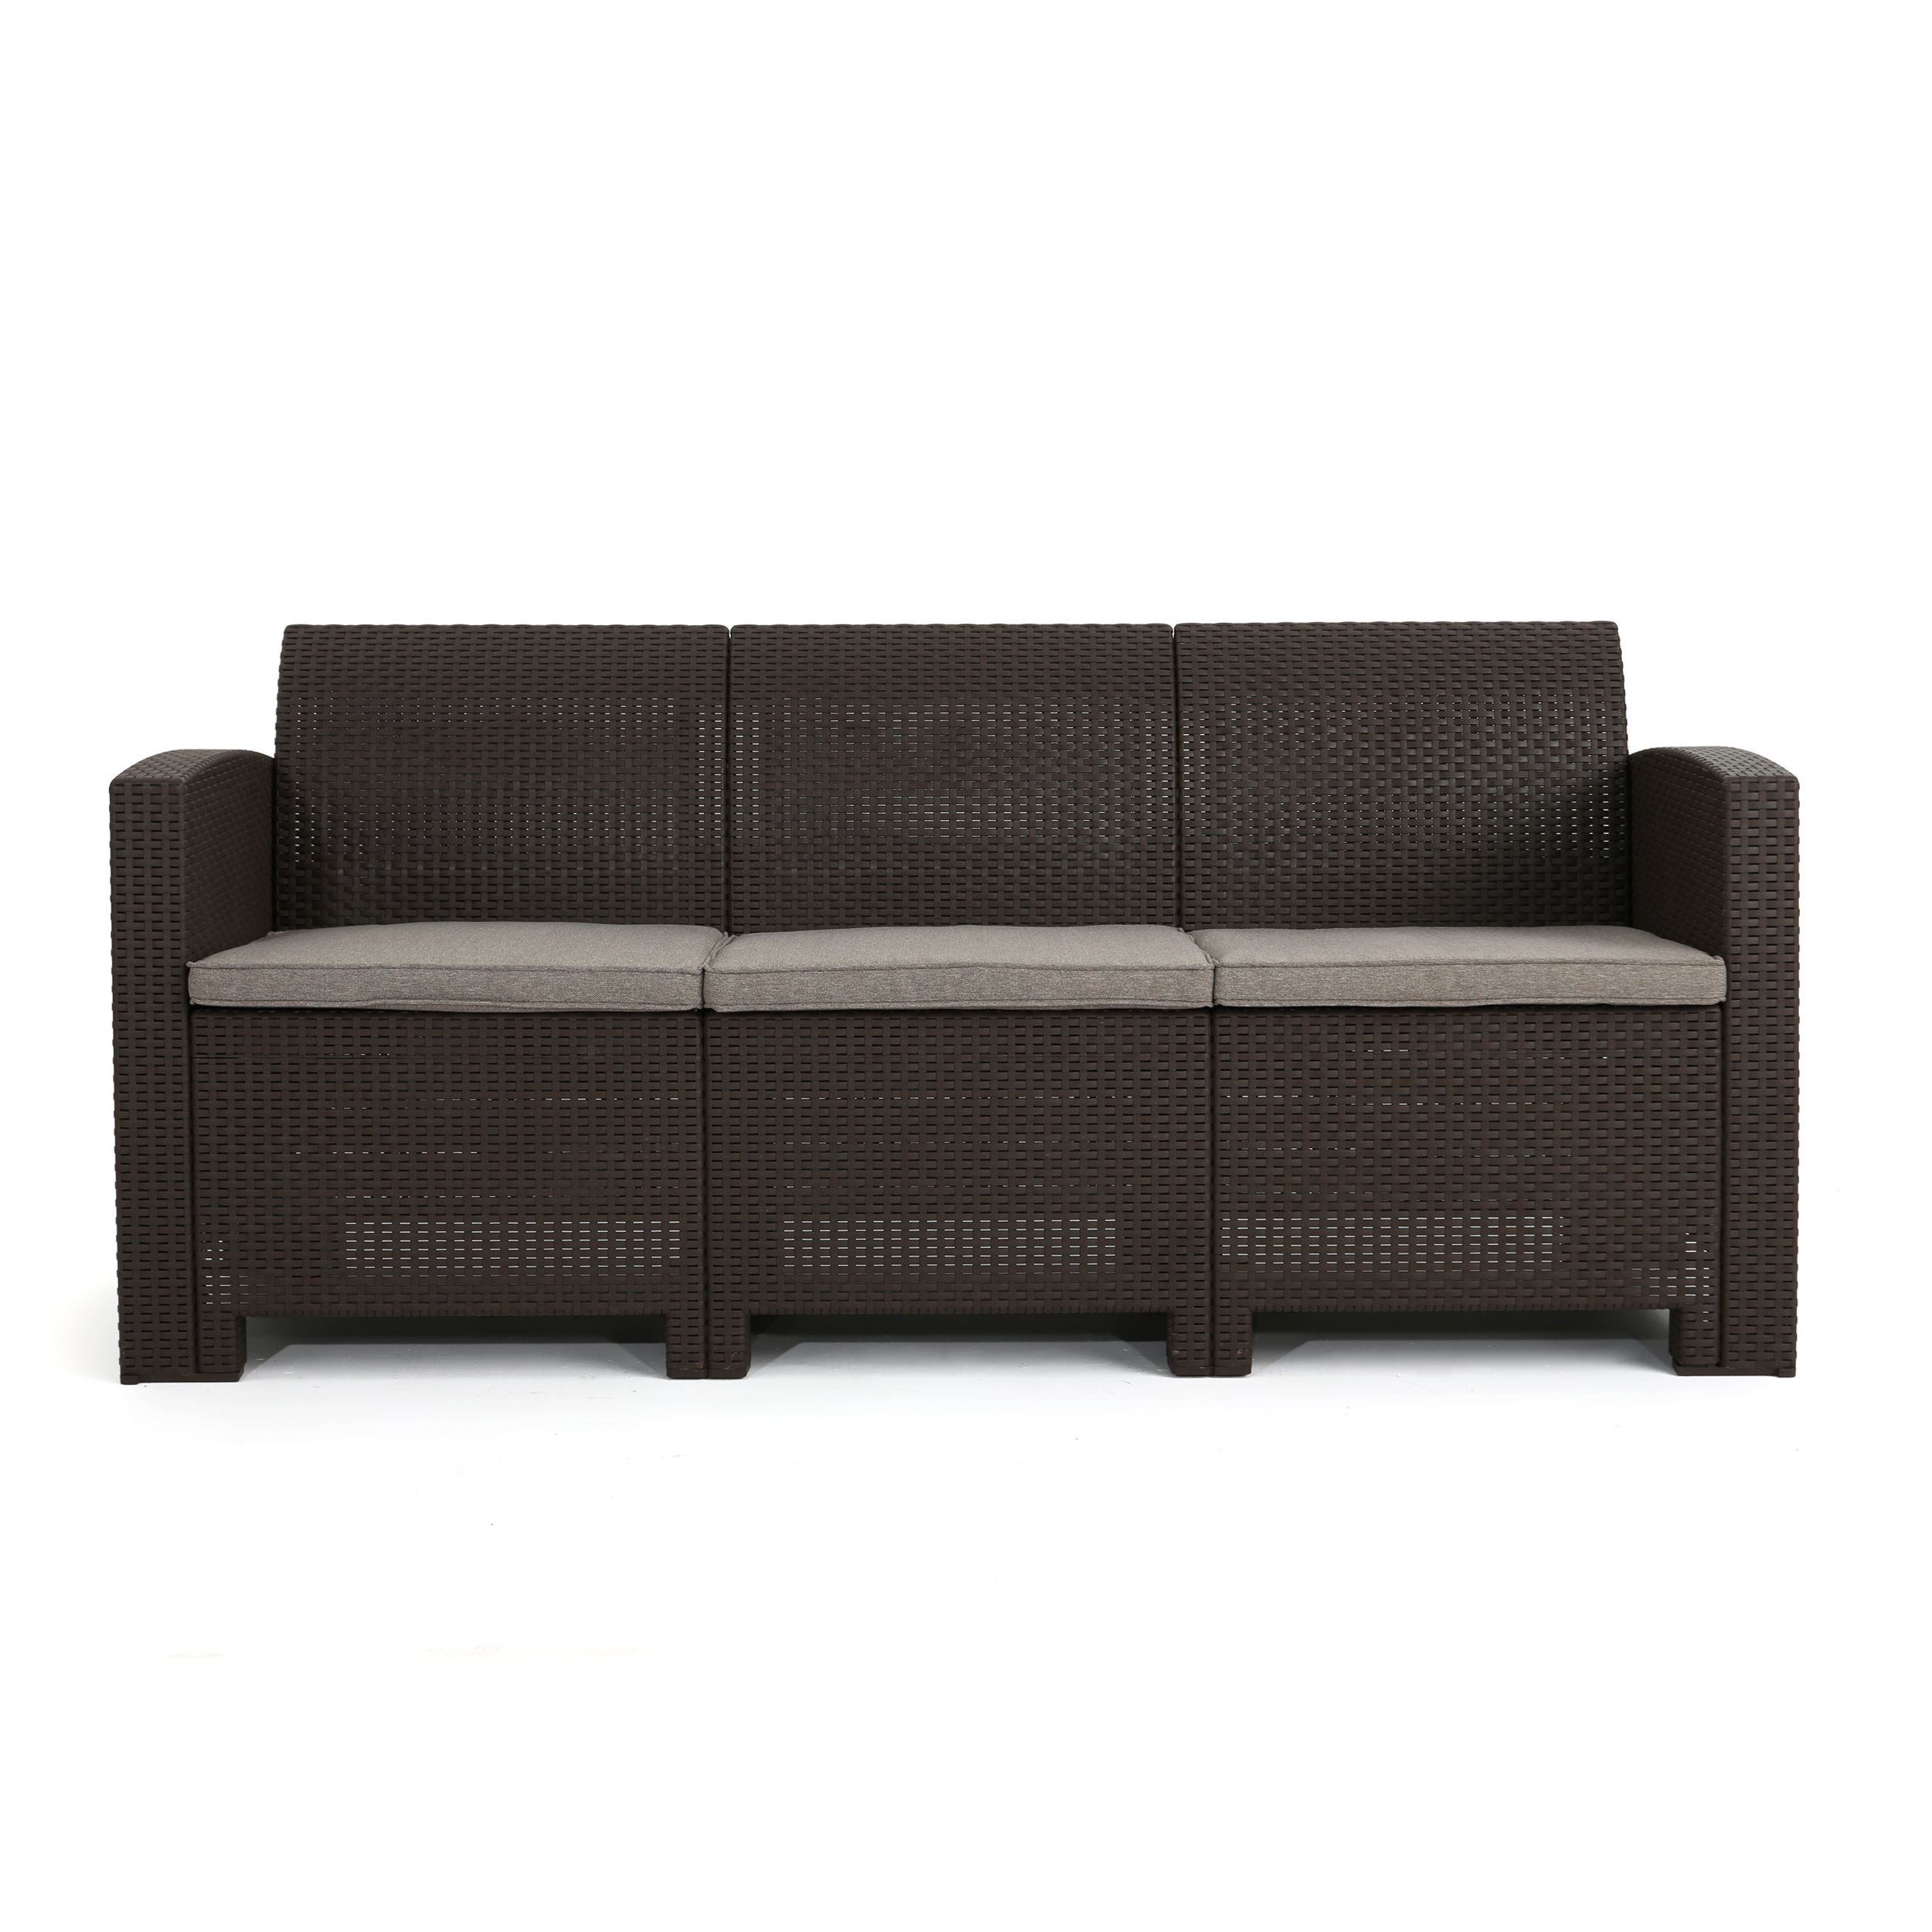 Andover Mills Yoselin Patio Sofa With Cushions Throughout Most Current Yoselin Patio Sofas With Cushions (View 3 of 20)